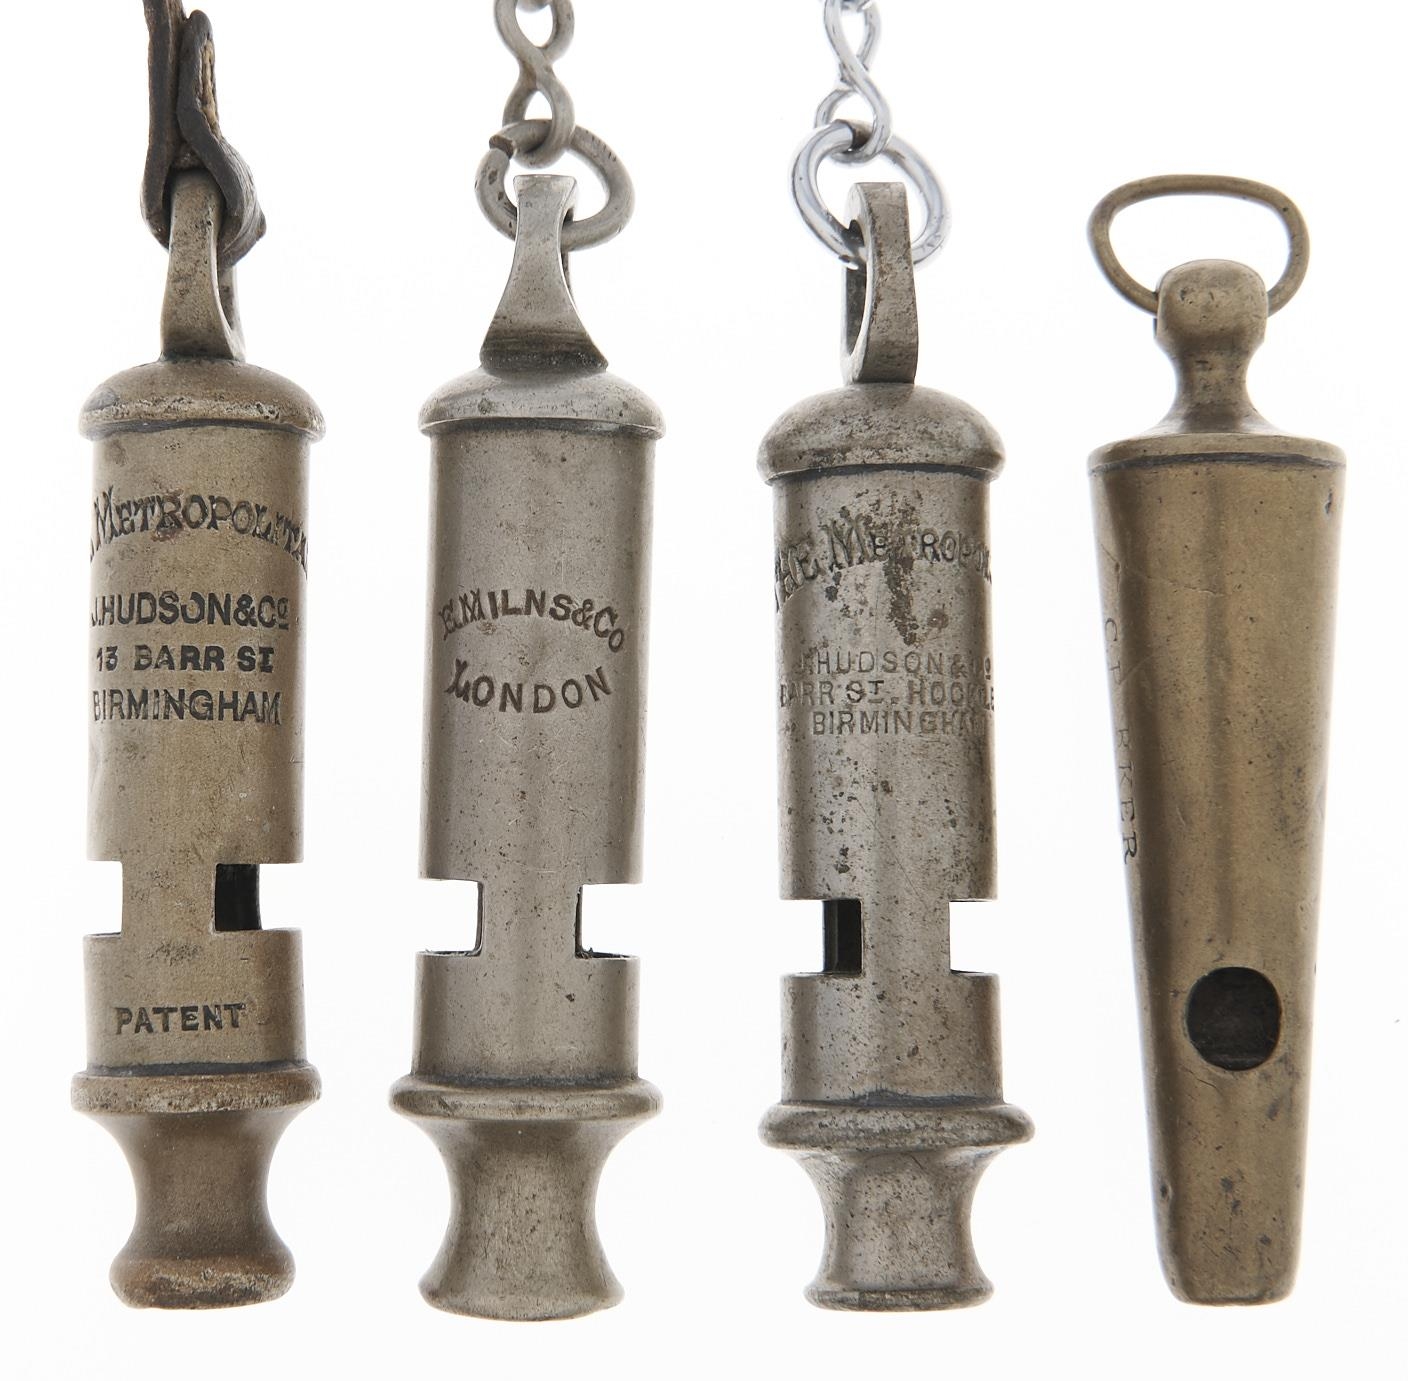 Two J D Hudson & Co Metropolitan whistles, a similar whistle and a brass whistle, late 19th /